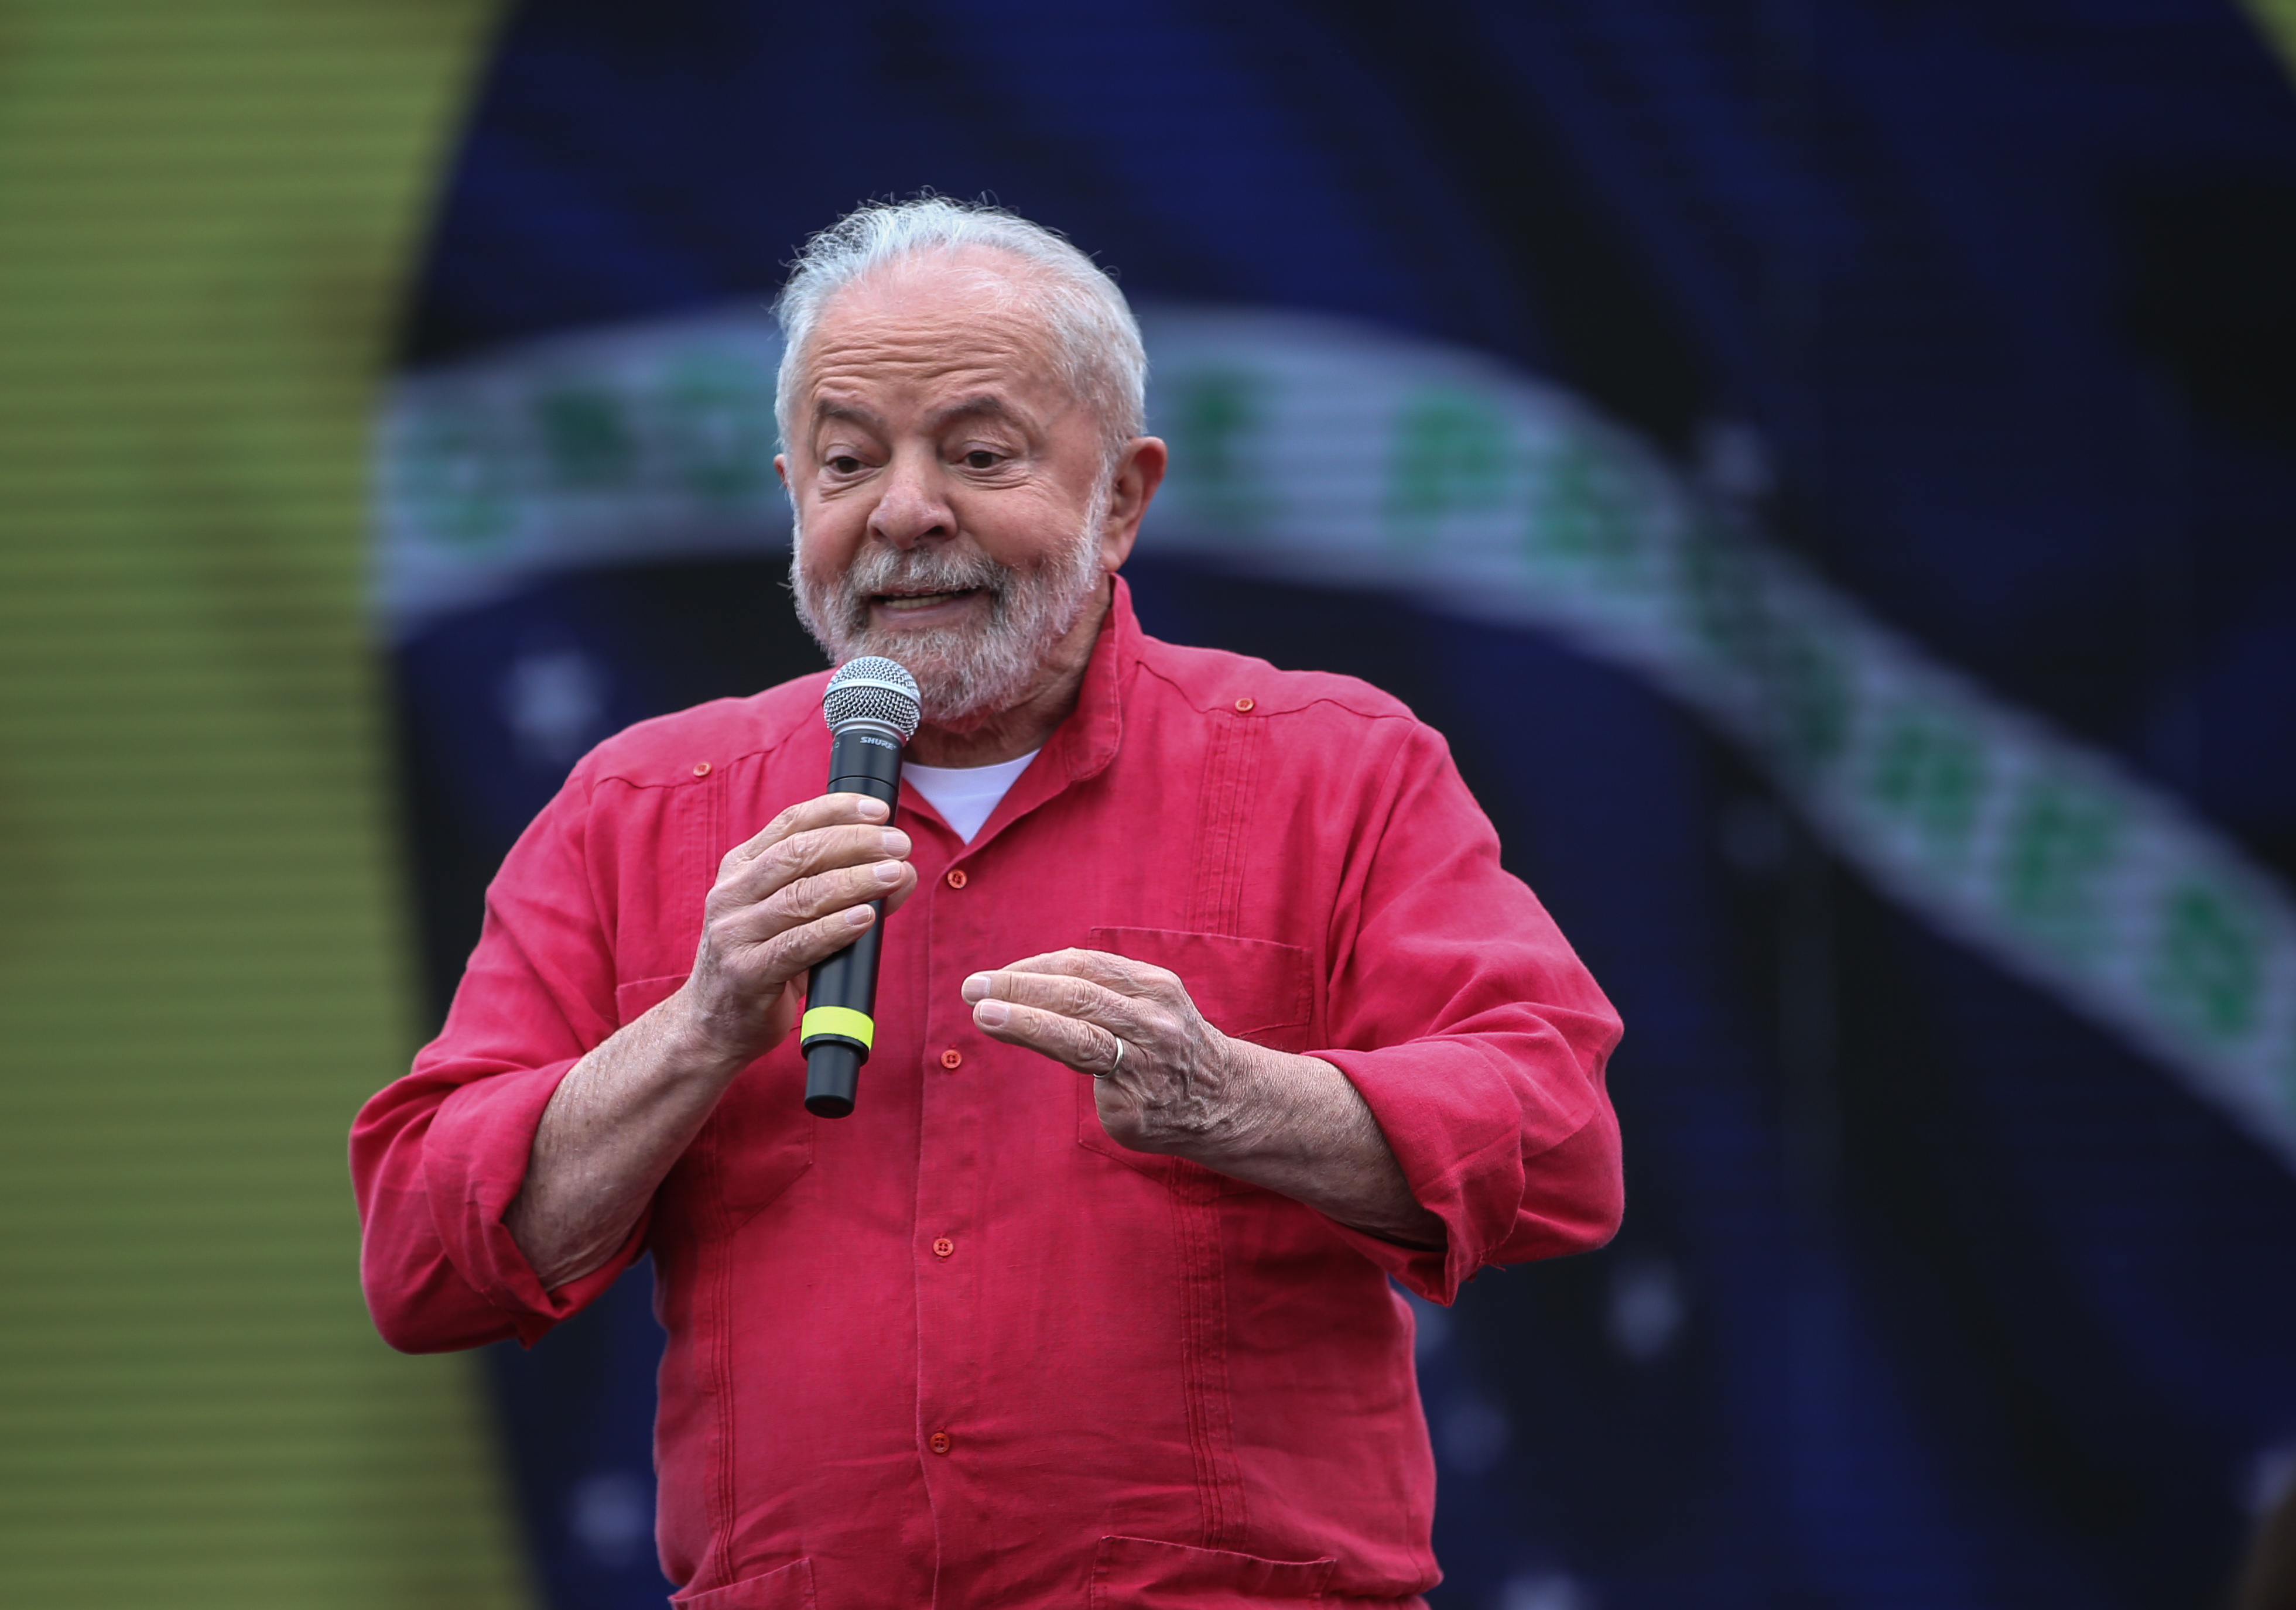 A photo of ex president Lula from Brazil speaking in front of a Brazilian flag